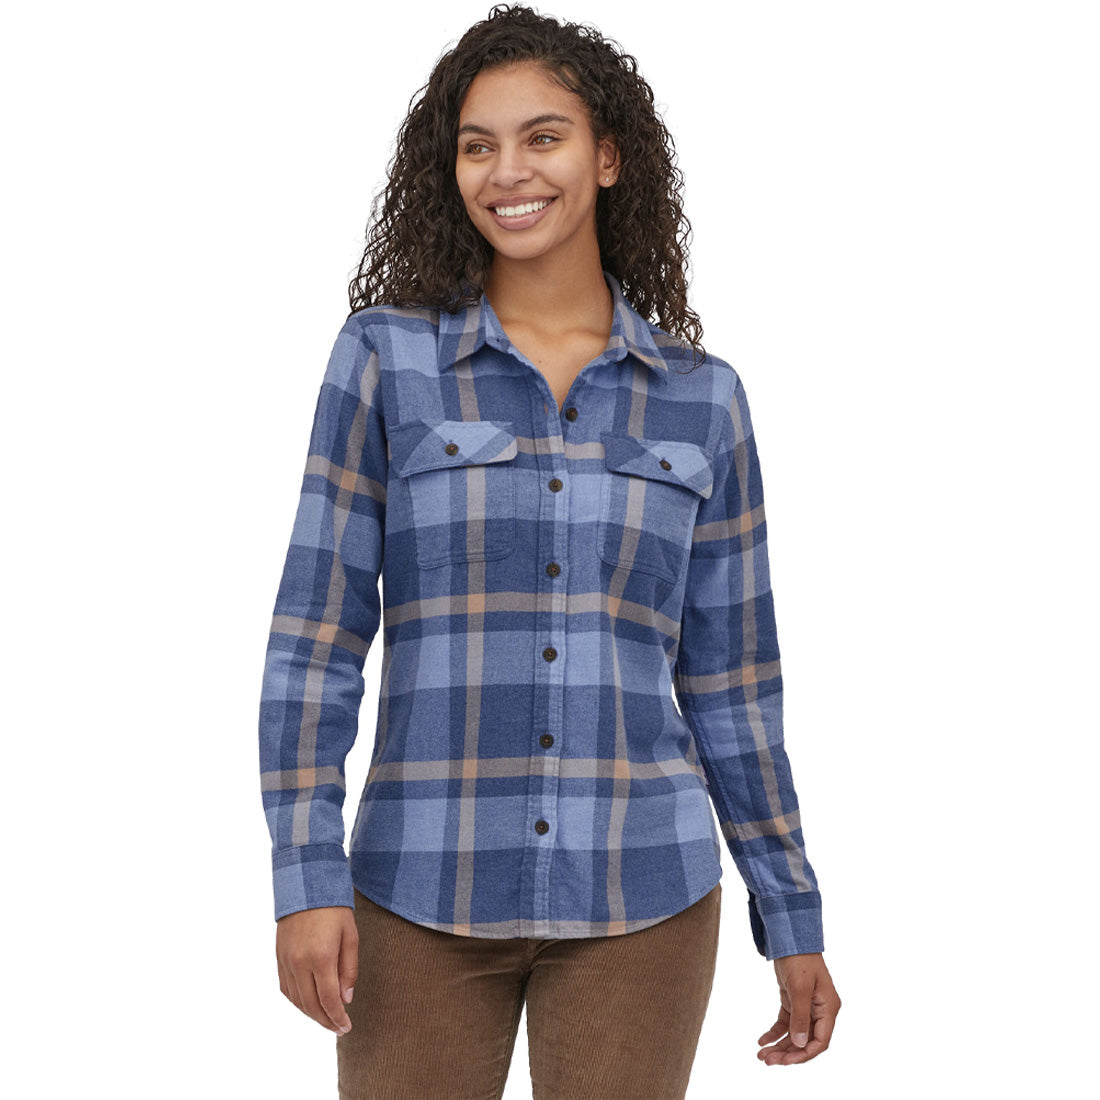 Patagonia Midweight Flannel Shirt - Women's